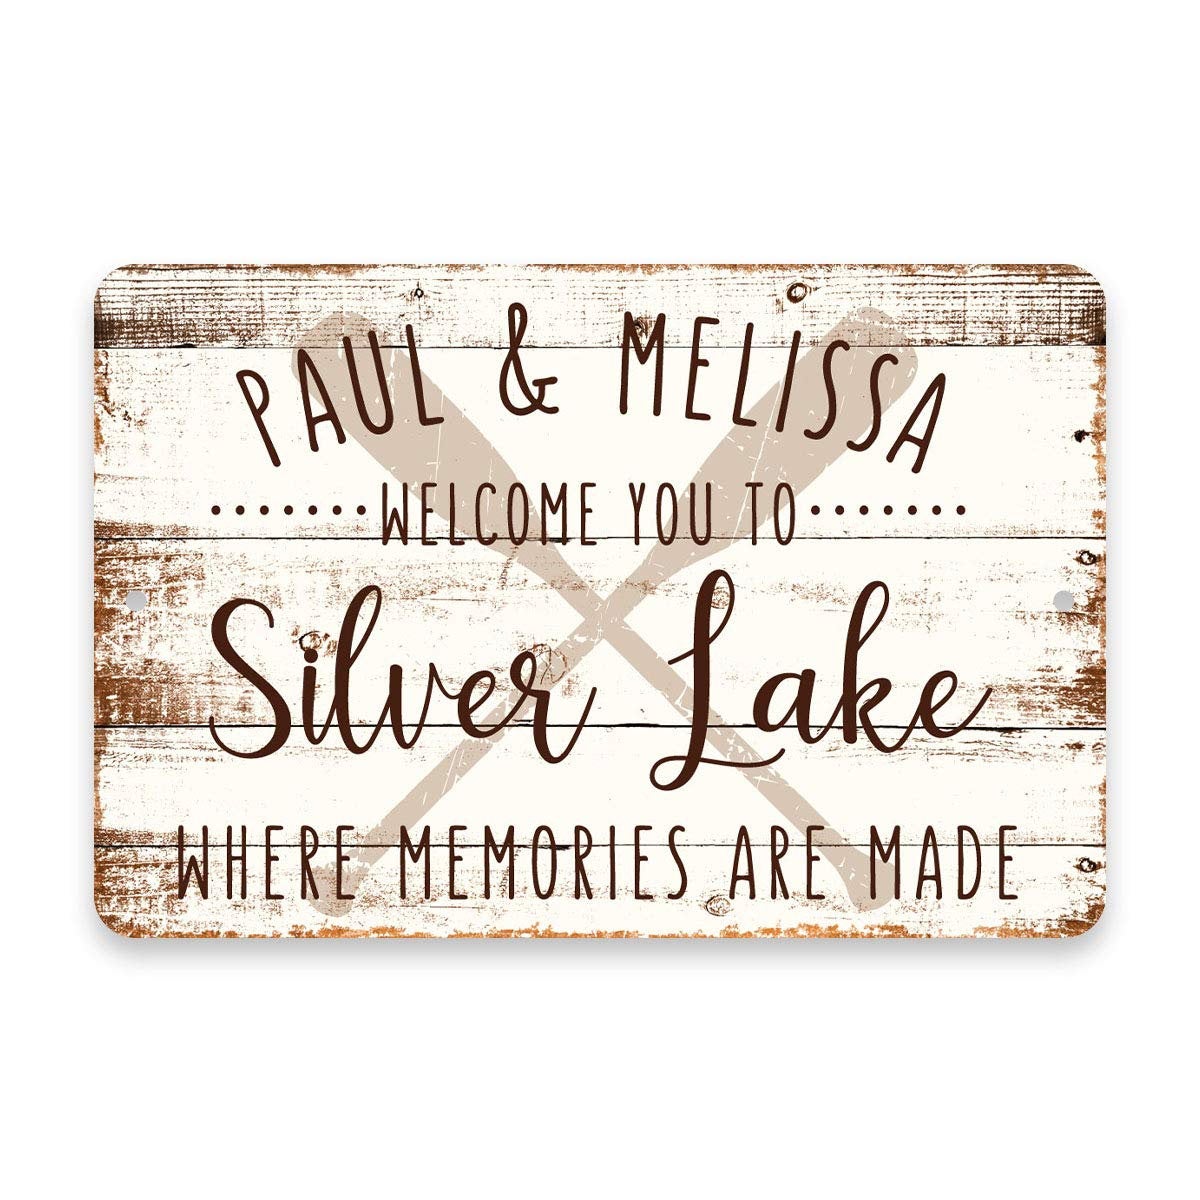 Personalized Welcome to Silver Lake Where Memories are Made Sign - 8 X 12 Metal Sign with Wood Look